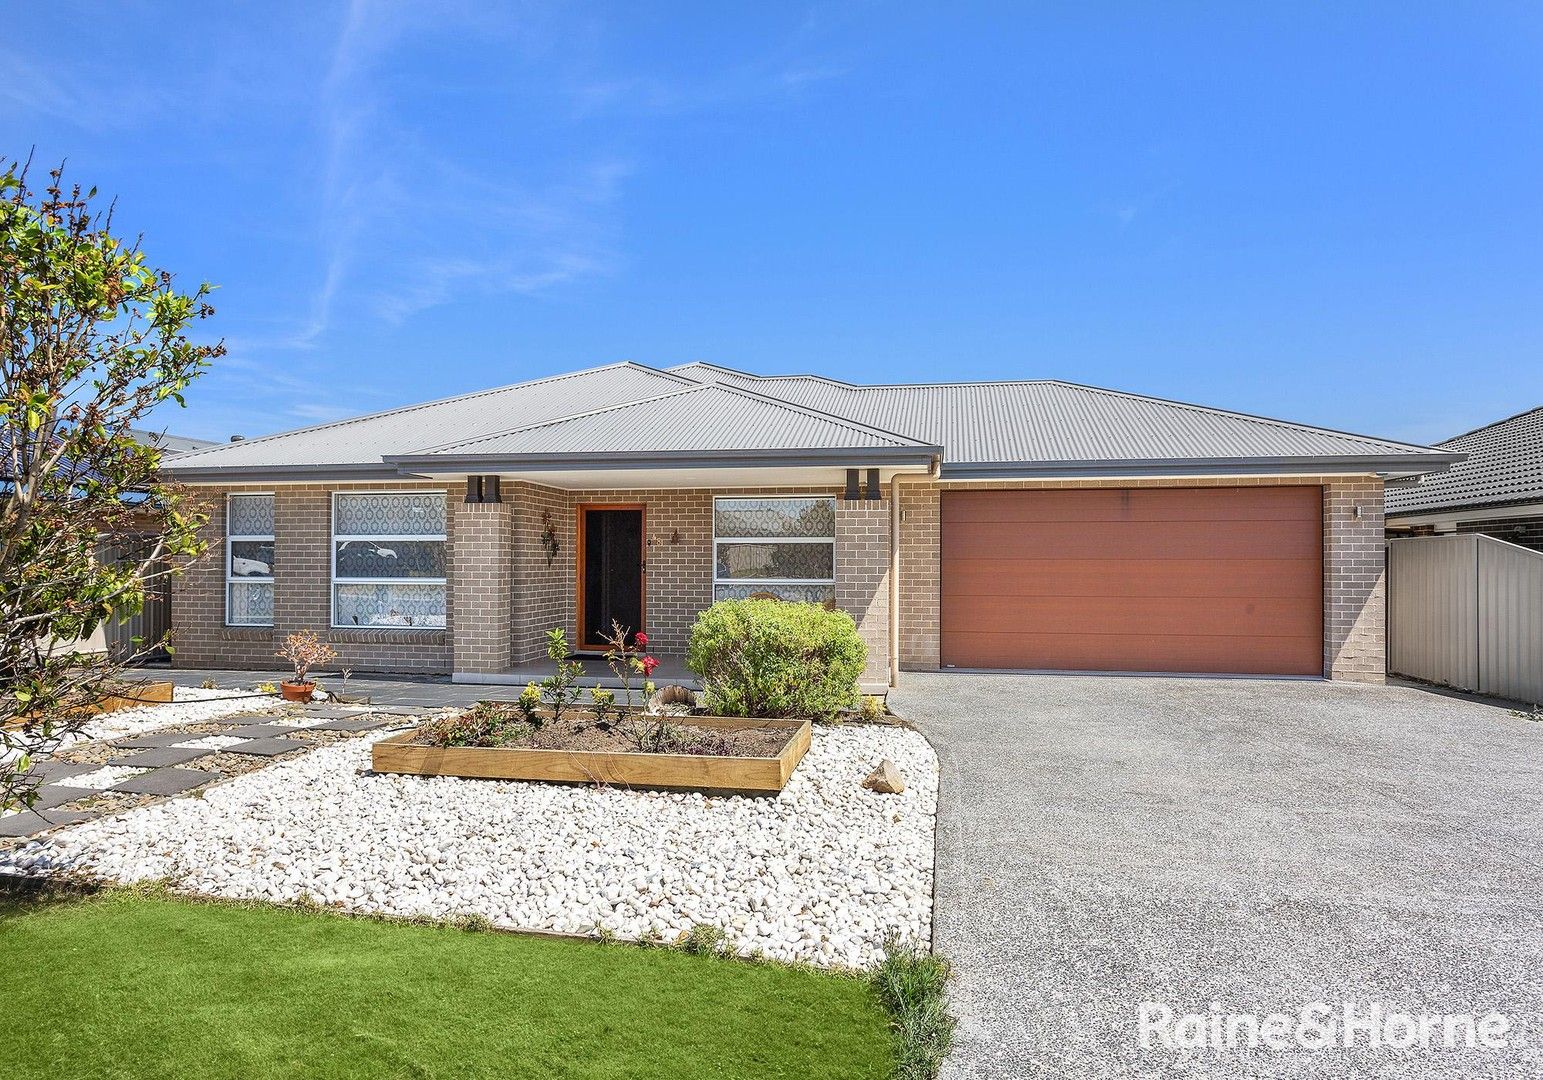 4 bedrooms House in 48 Caladenia Crescent SOUTH NOWRA NSW, 2541